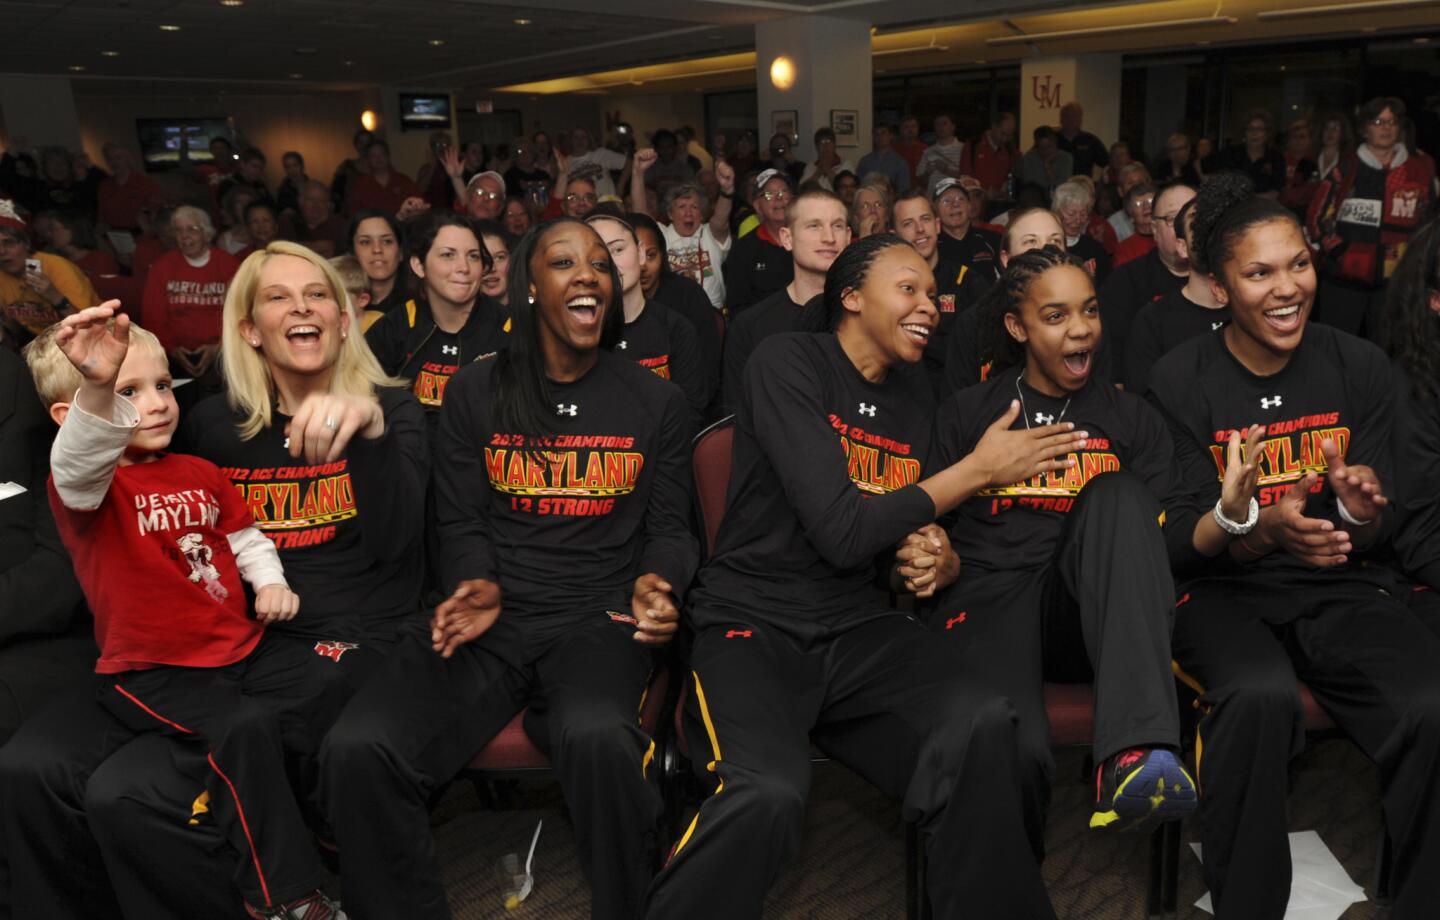 University of Maryland Women's basketball team cheer as they learn their seed and their opponent (Navy) in the NCAA tournament from one of the ESPN channels. From left are Coach Brenda Frese holding Tyler, one of her twins; players Laurin Mincy (#1); Alicia DeVaughn (#13); Sequoia Austin (#0); and Alyssa Thomas (#25).